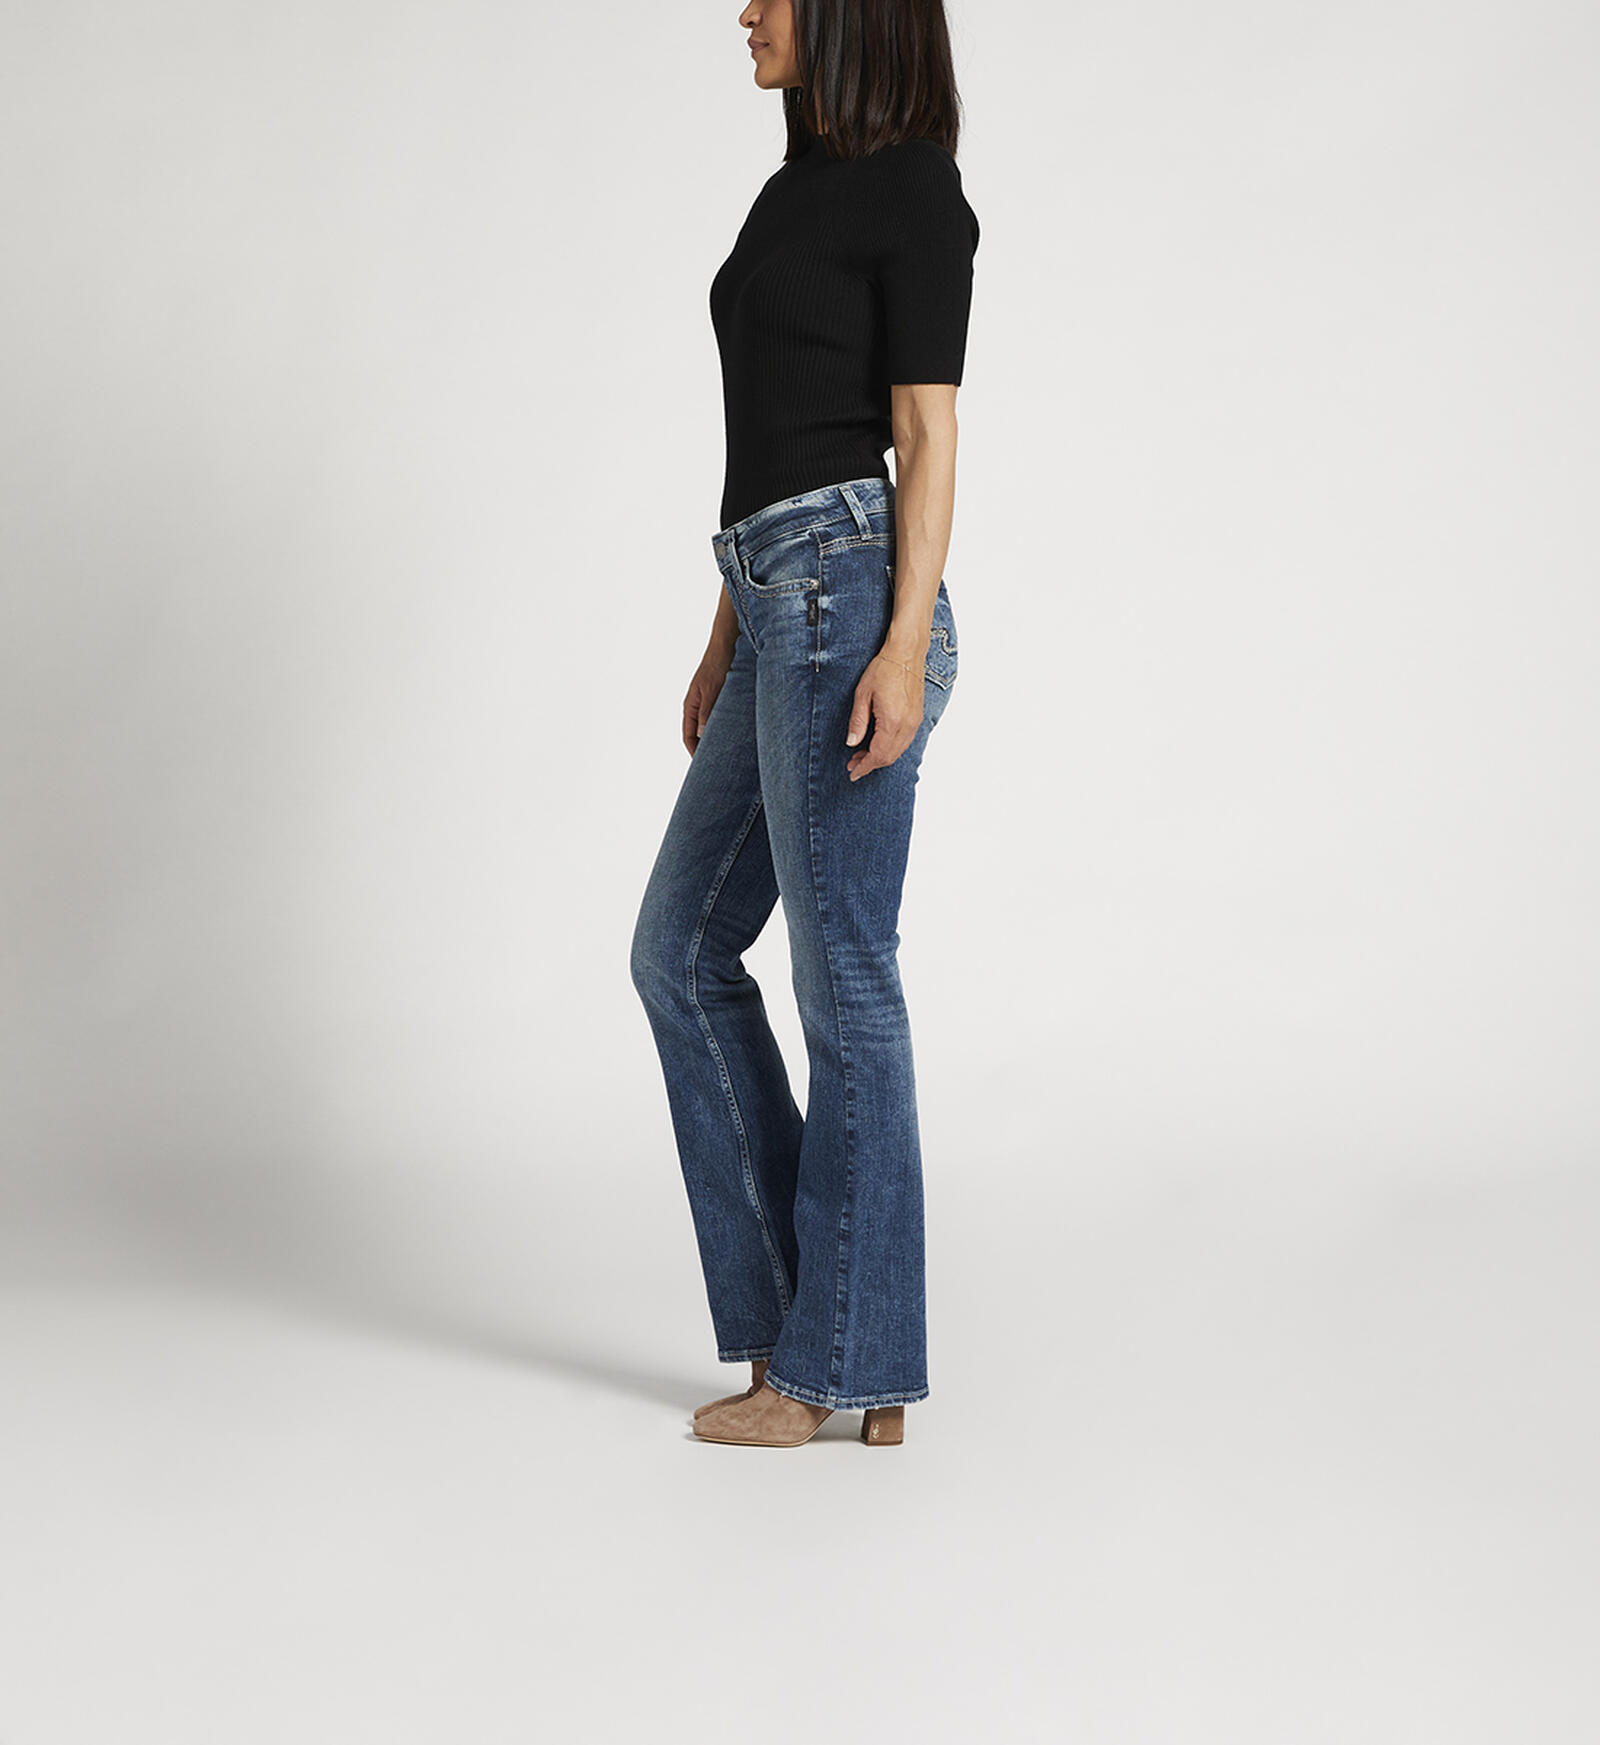 Buy Suki Mid Rise Bootcut Jeans for CAD 108.00